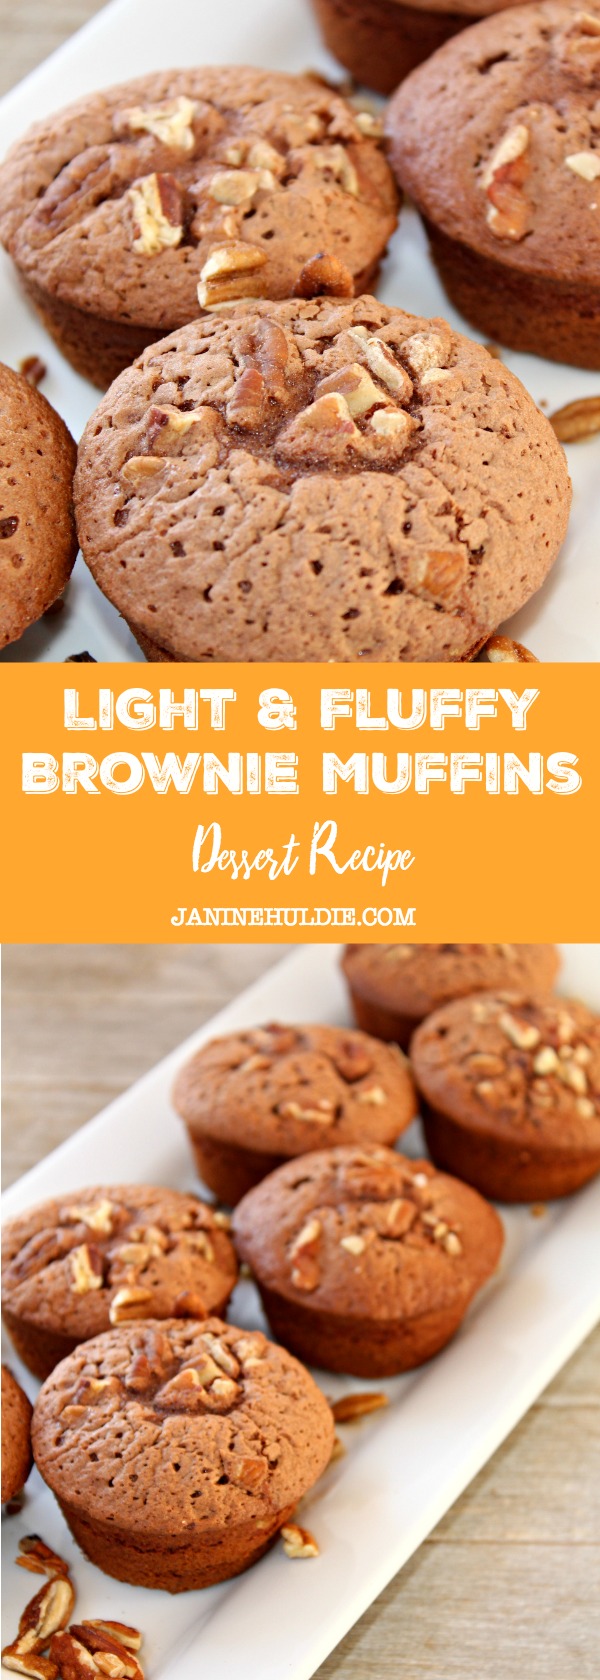 Light and Fluffy Brownie Muffins